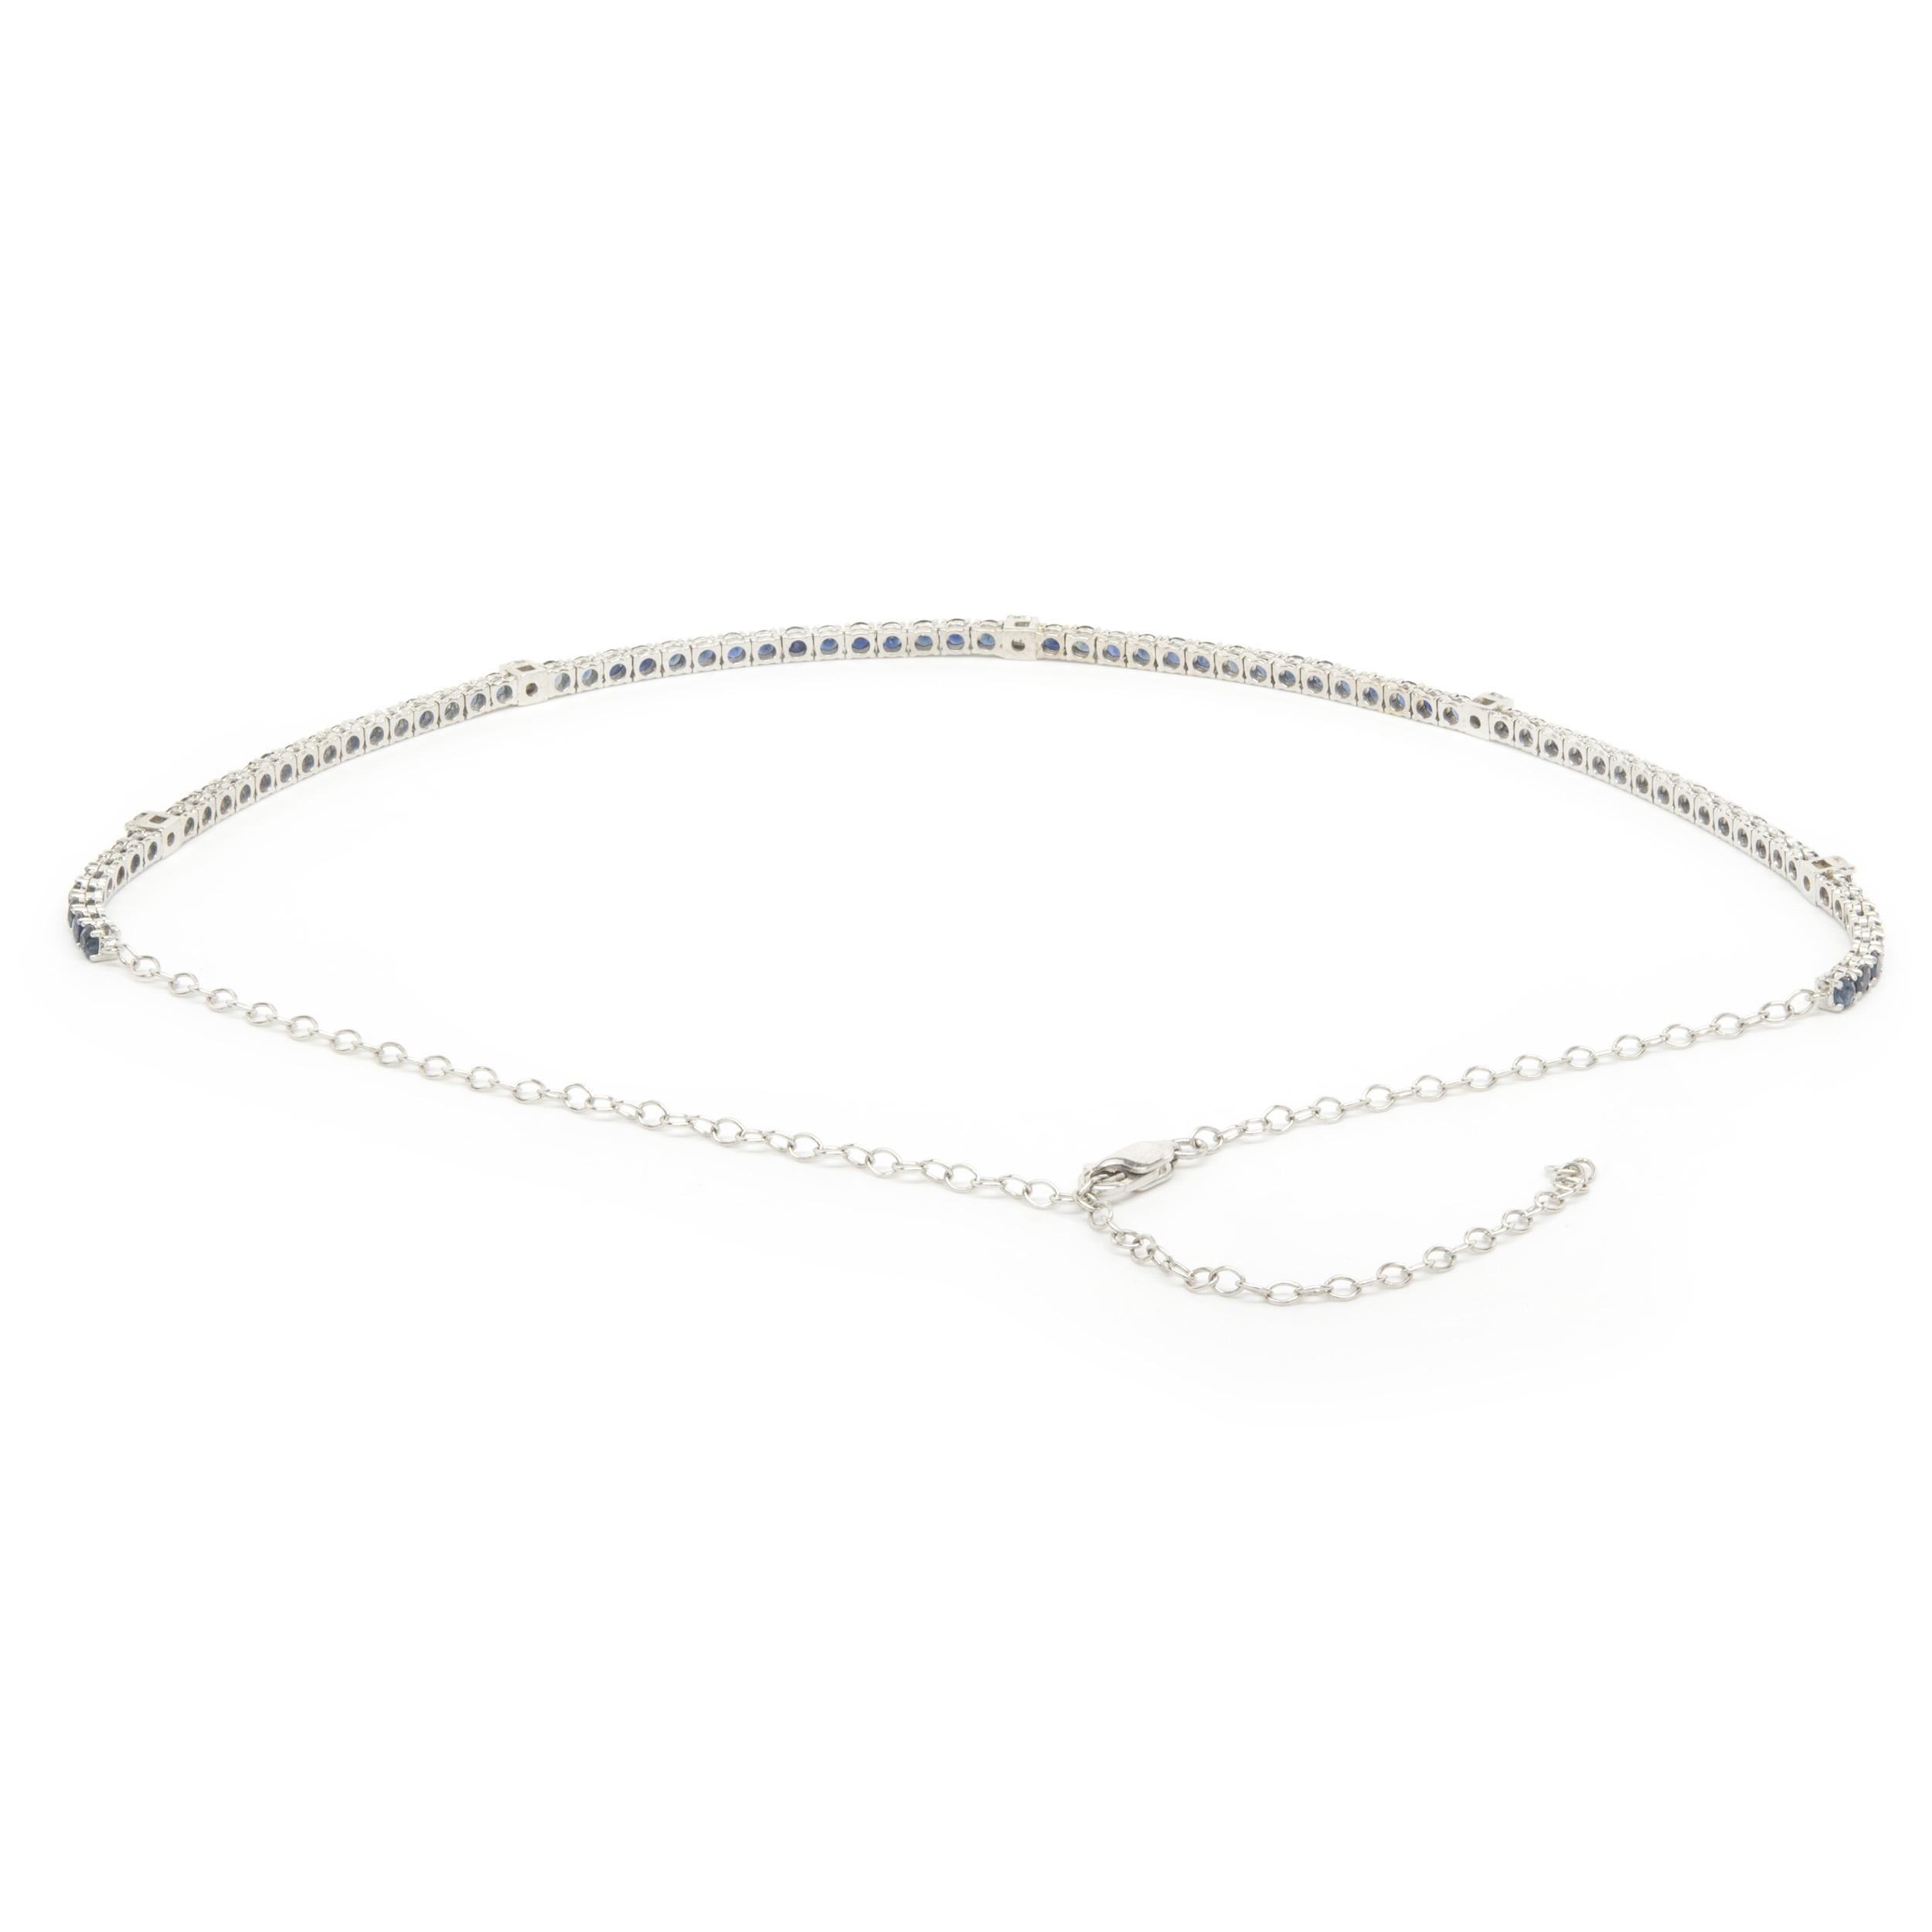 Designer: custom 
Material: 14K white gold
Diamond: 5 round brilliant cut = 0.50cttw
Color: G
Clarity: SI1
Dimensions: necklace measures 18-inches long 
Weight: 10.27 grams